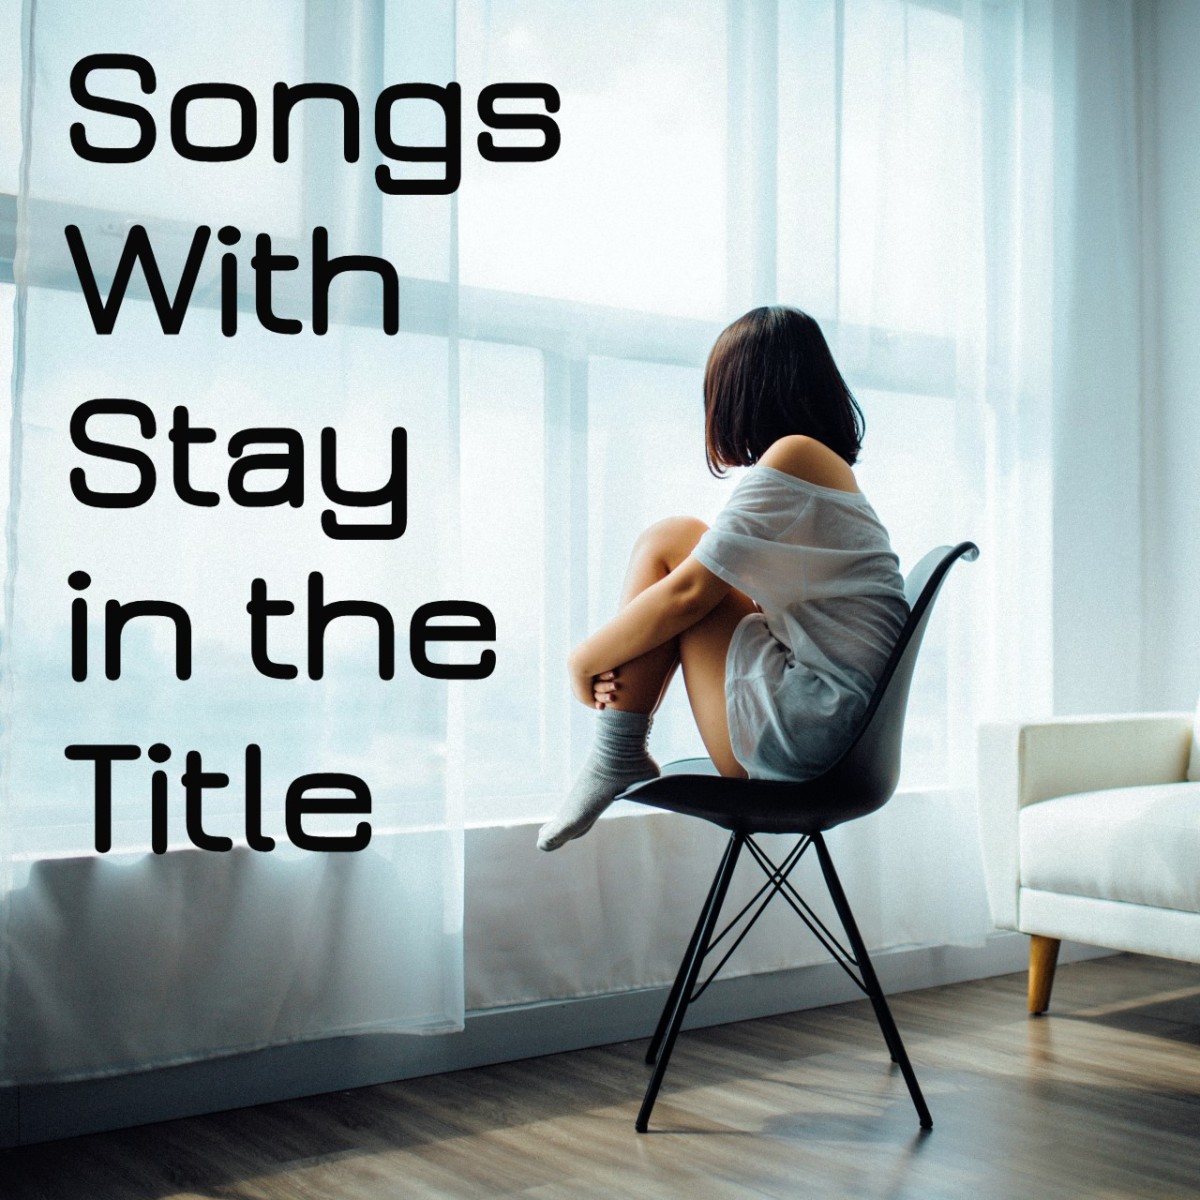 70 Songs With Stay in the Title